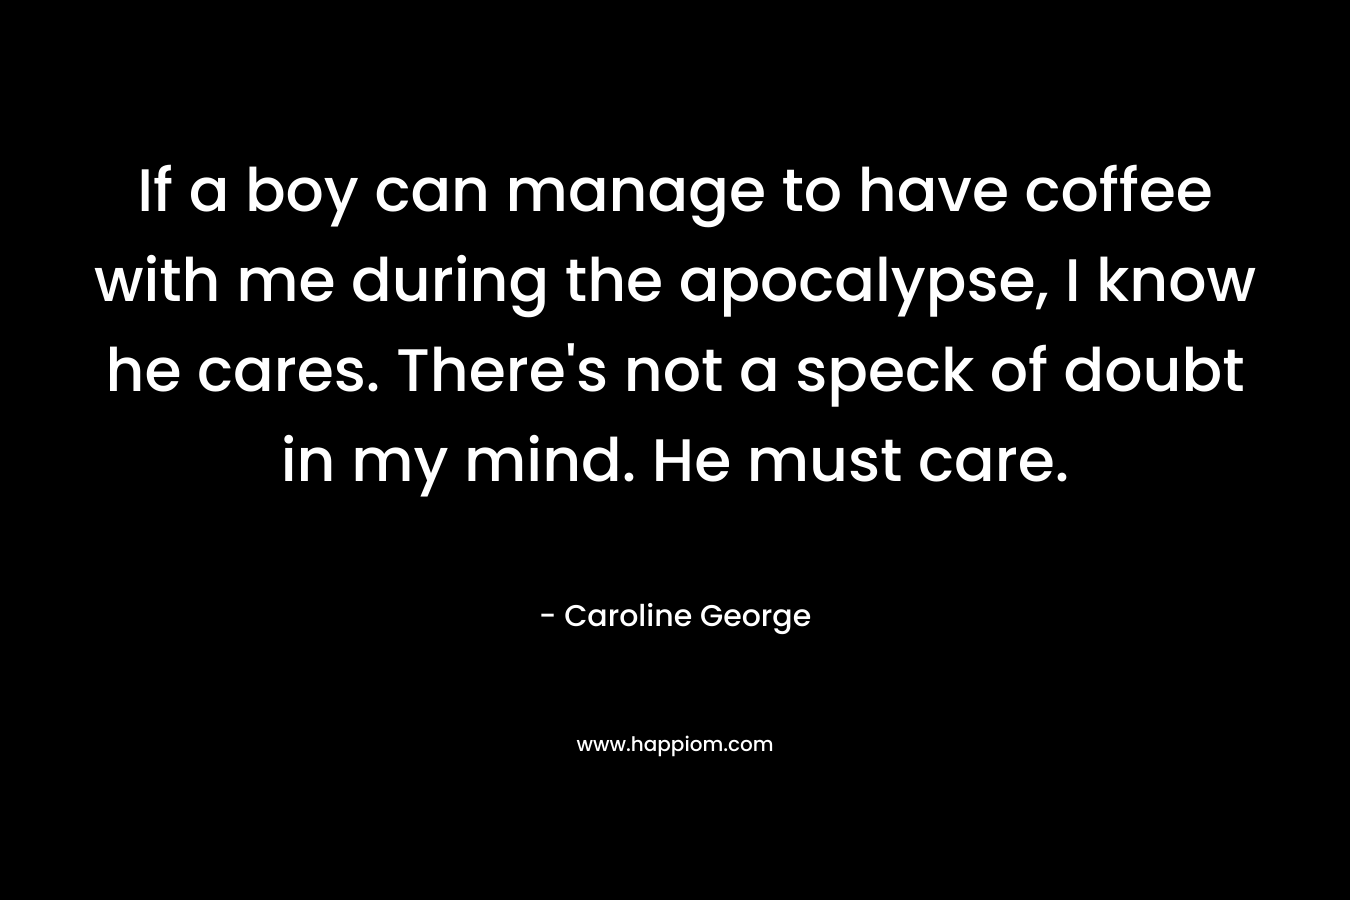 If a boy can manage to have coffee with me during the apocalypse, I know he cares. There's not a speck of doubt in my mind. He must care.